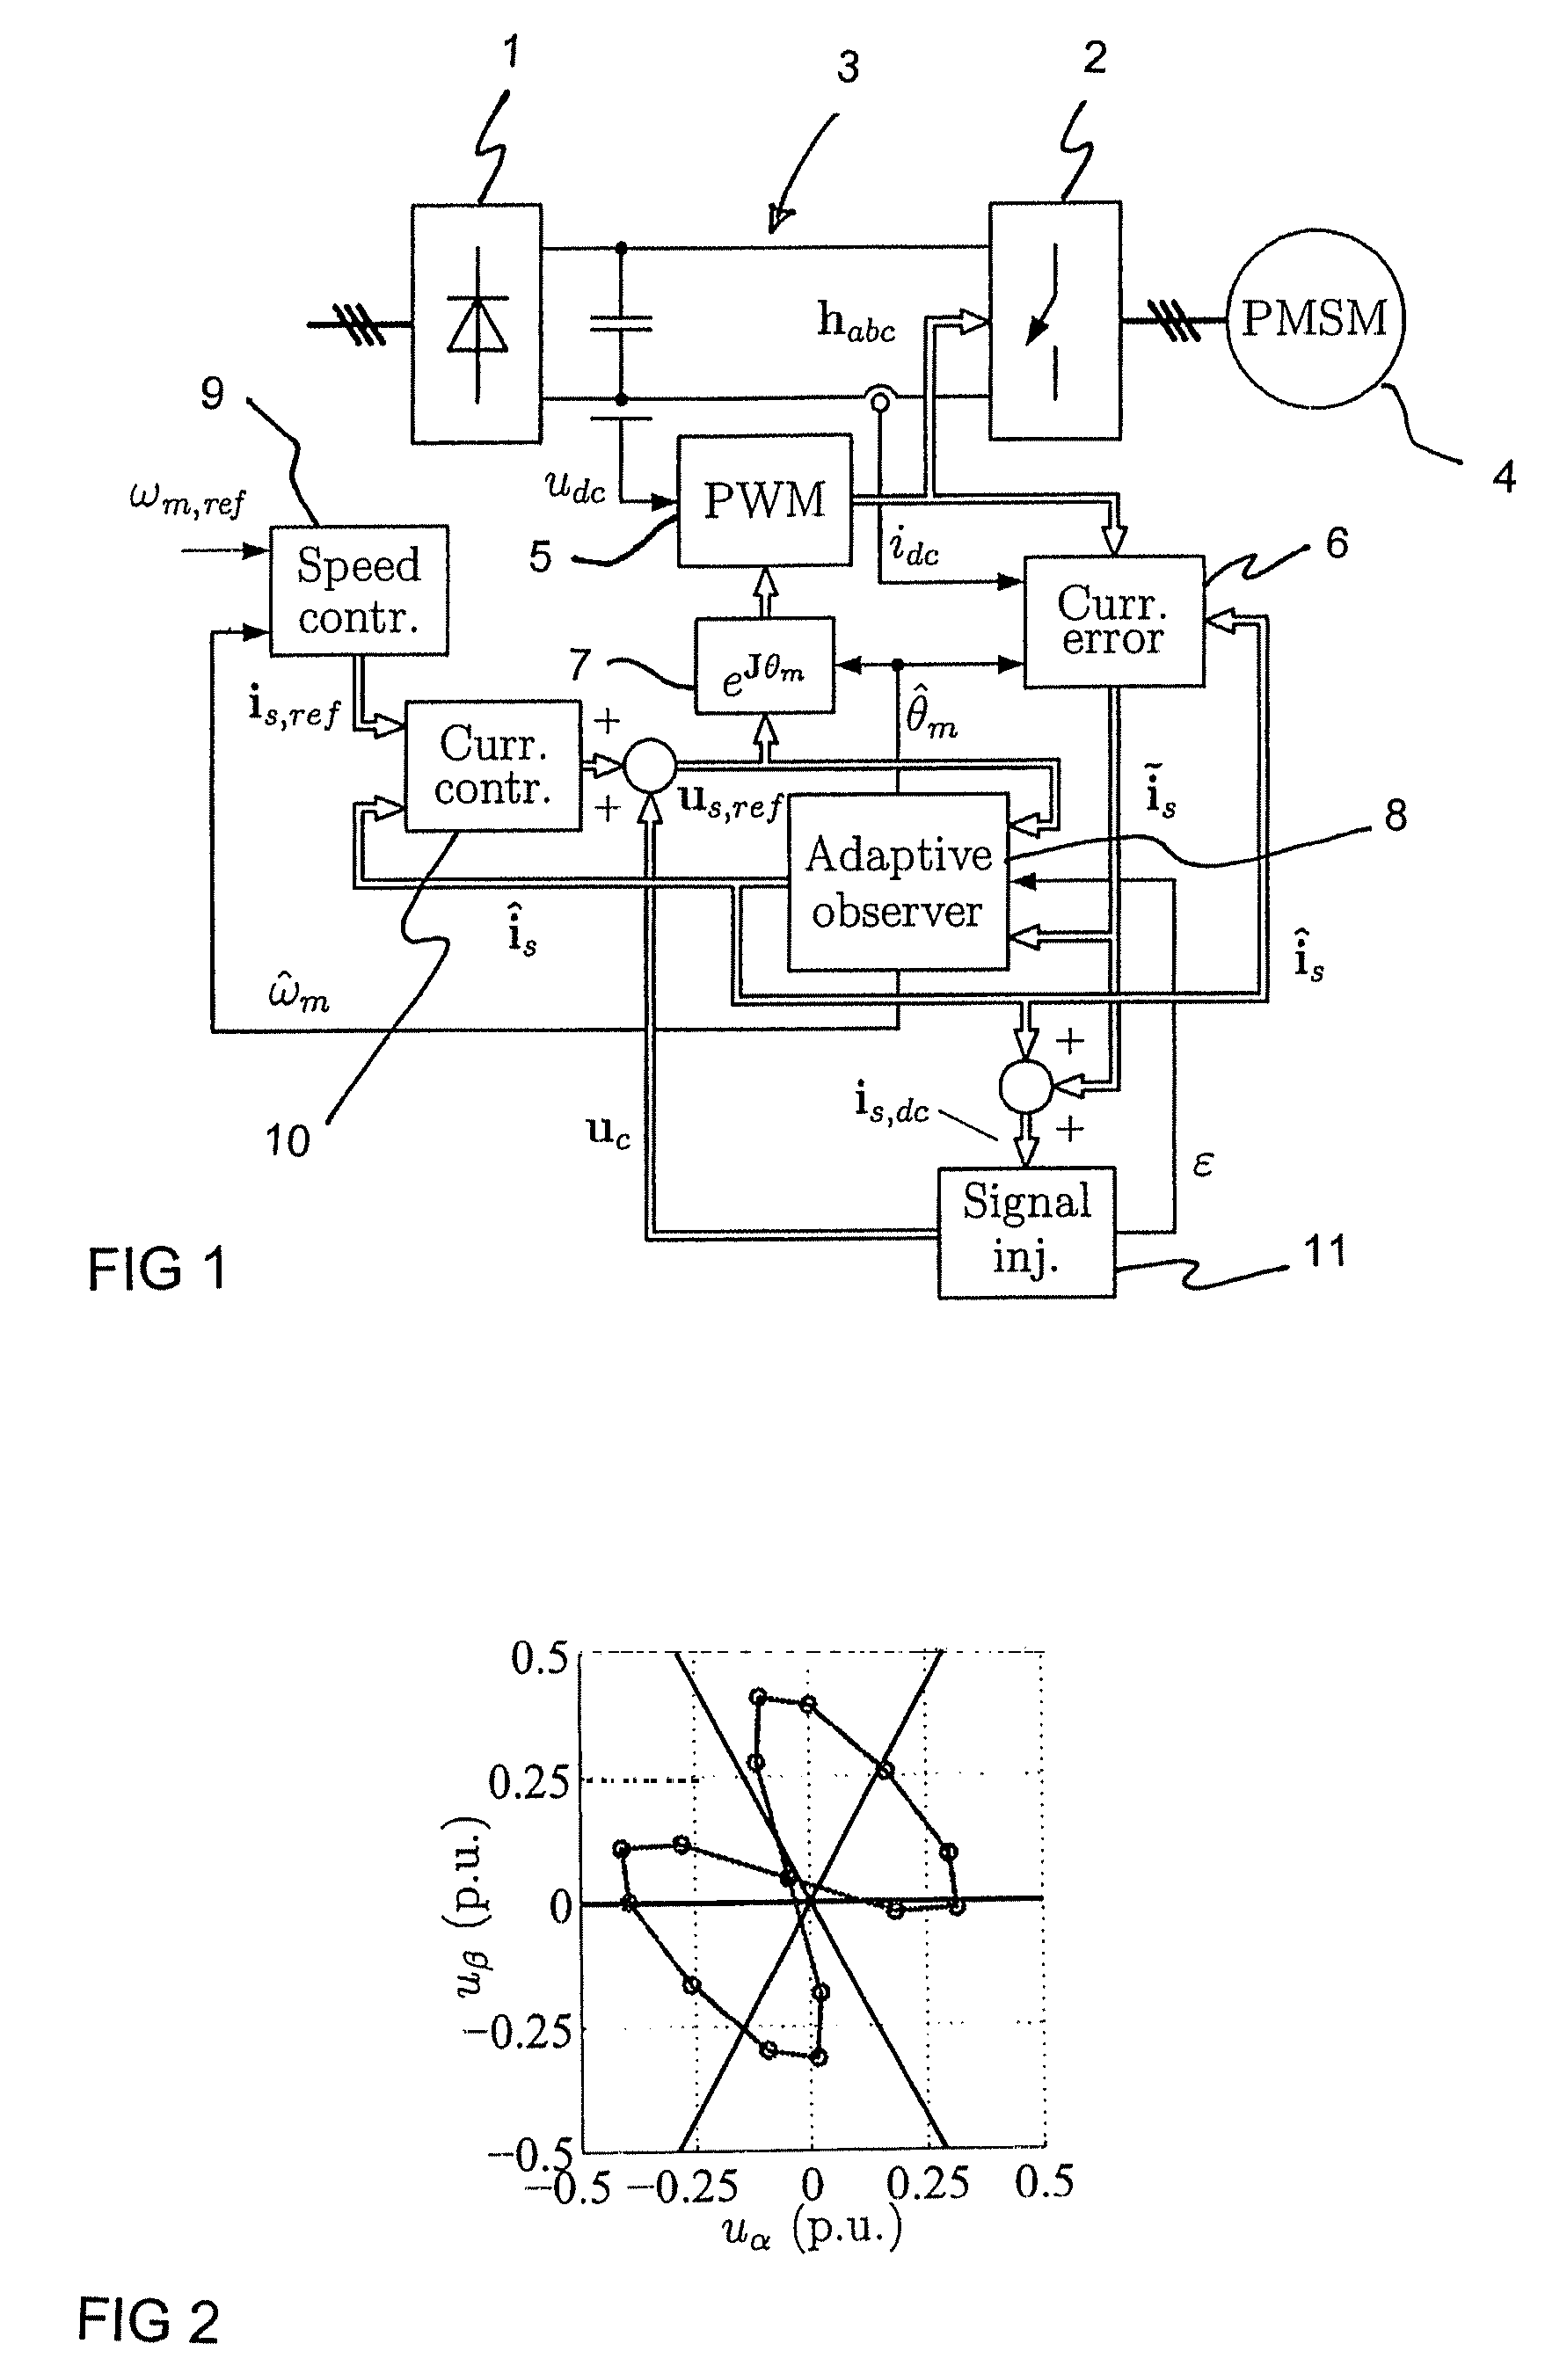 Method for sensorless estimation of rotor speed and position of a permanent magnet synchronous machine